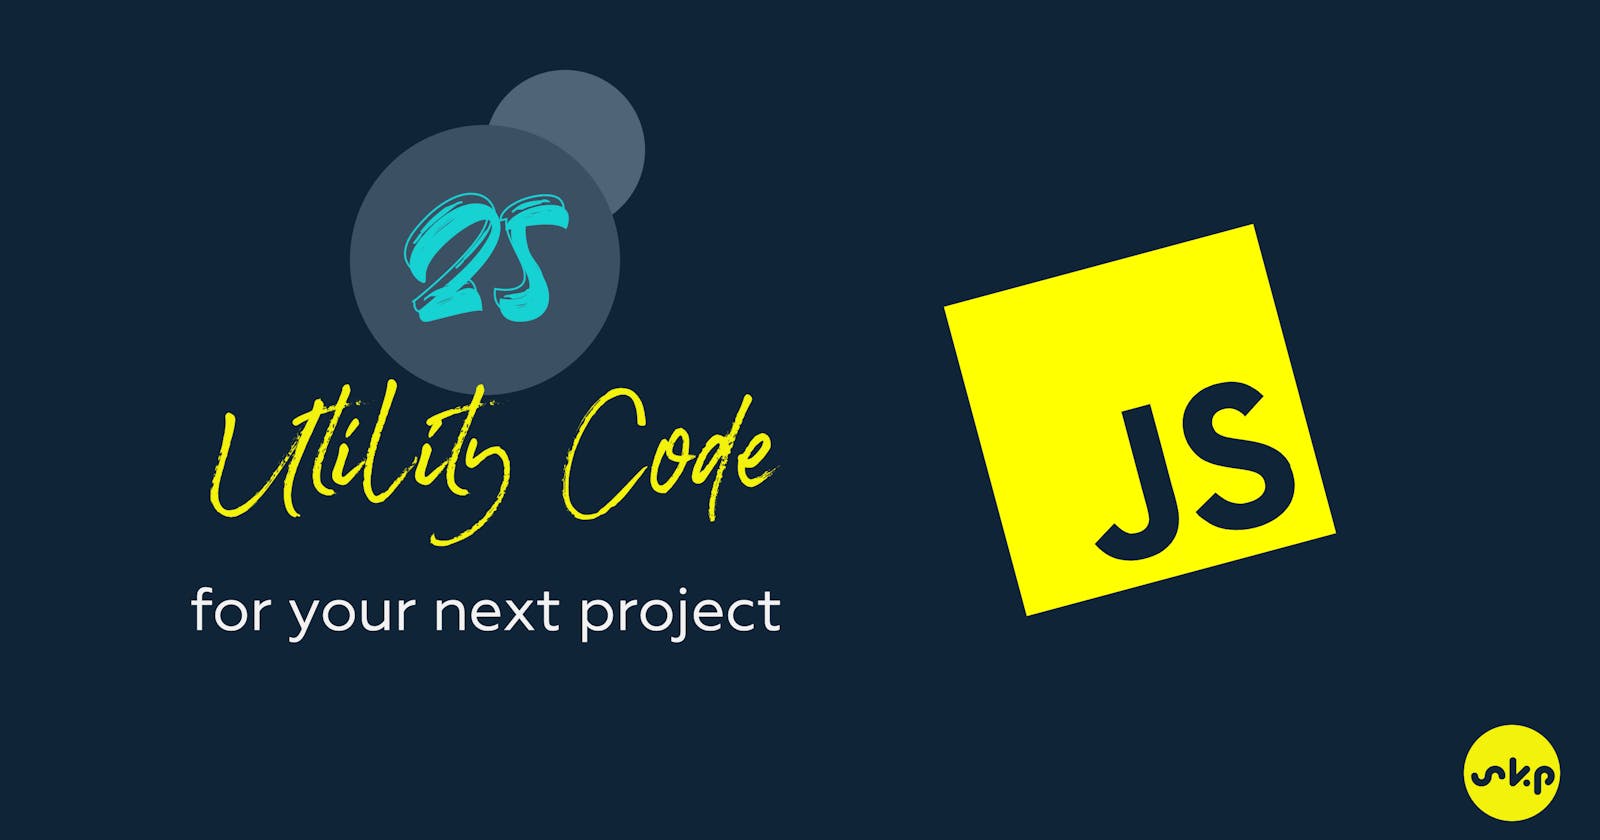 25 Utility Code for your next JavaScript Project